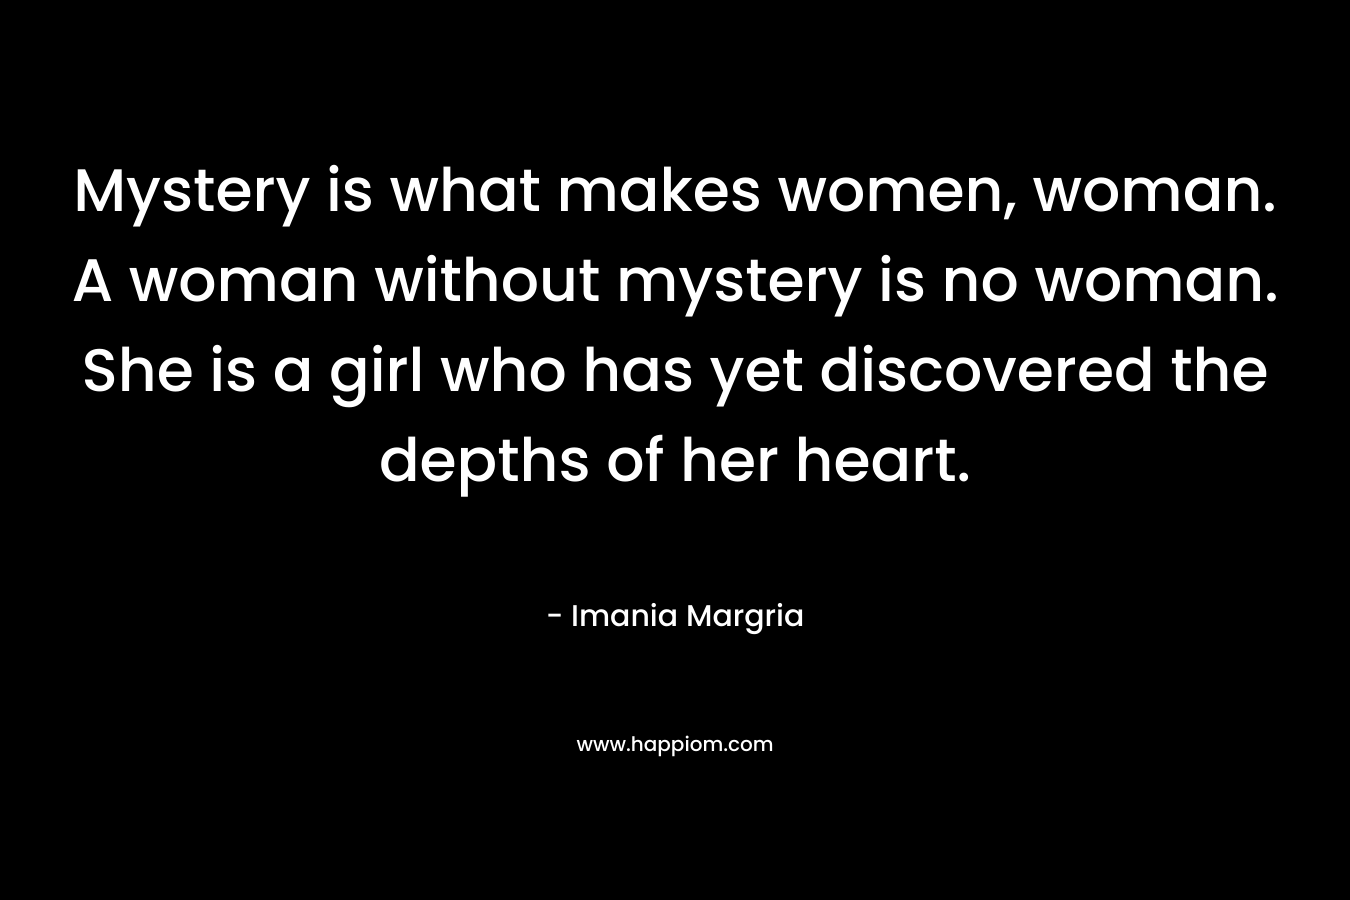 Mystery is what makes women, woman. A woman without mystery is no woman. She is a girl who has yet discovered the depths of her heart.